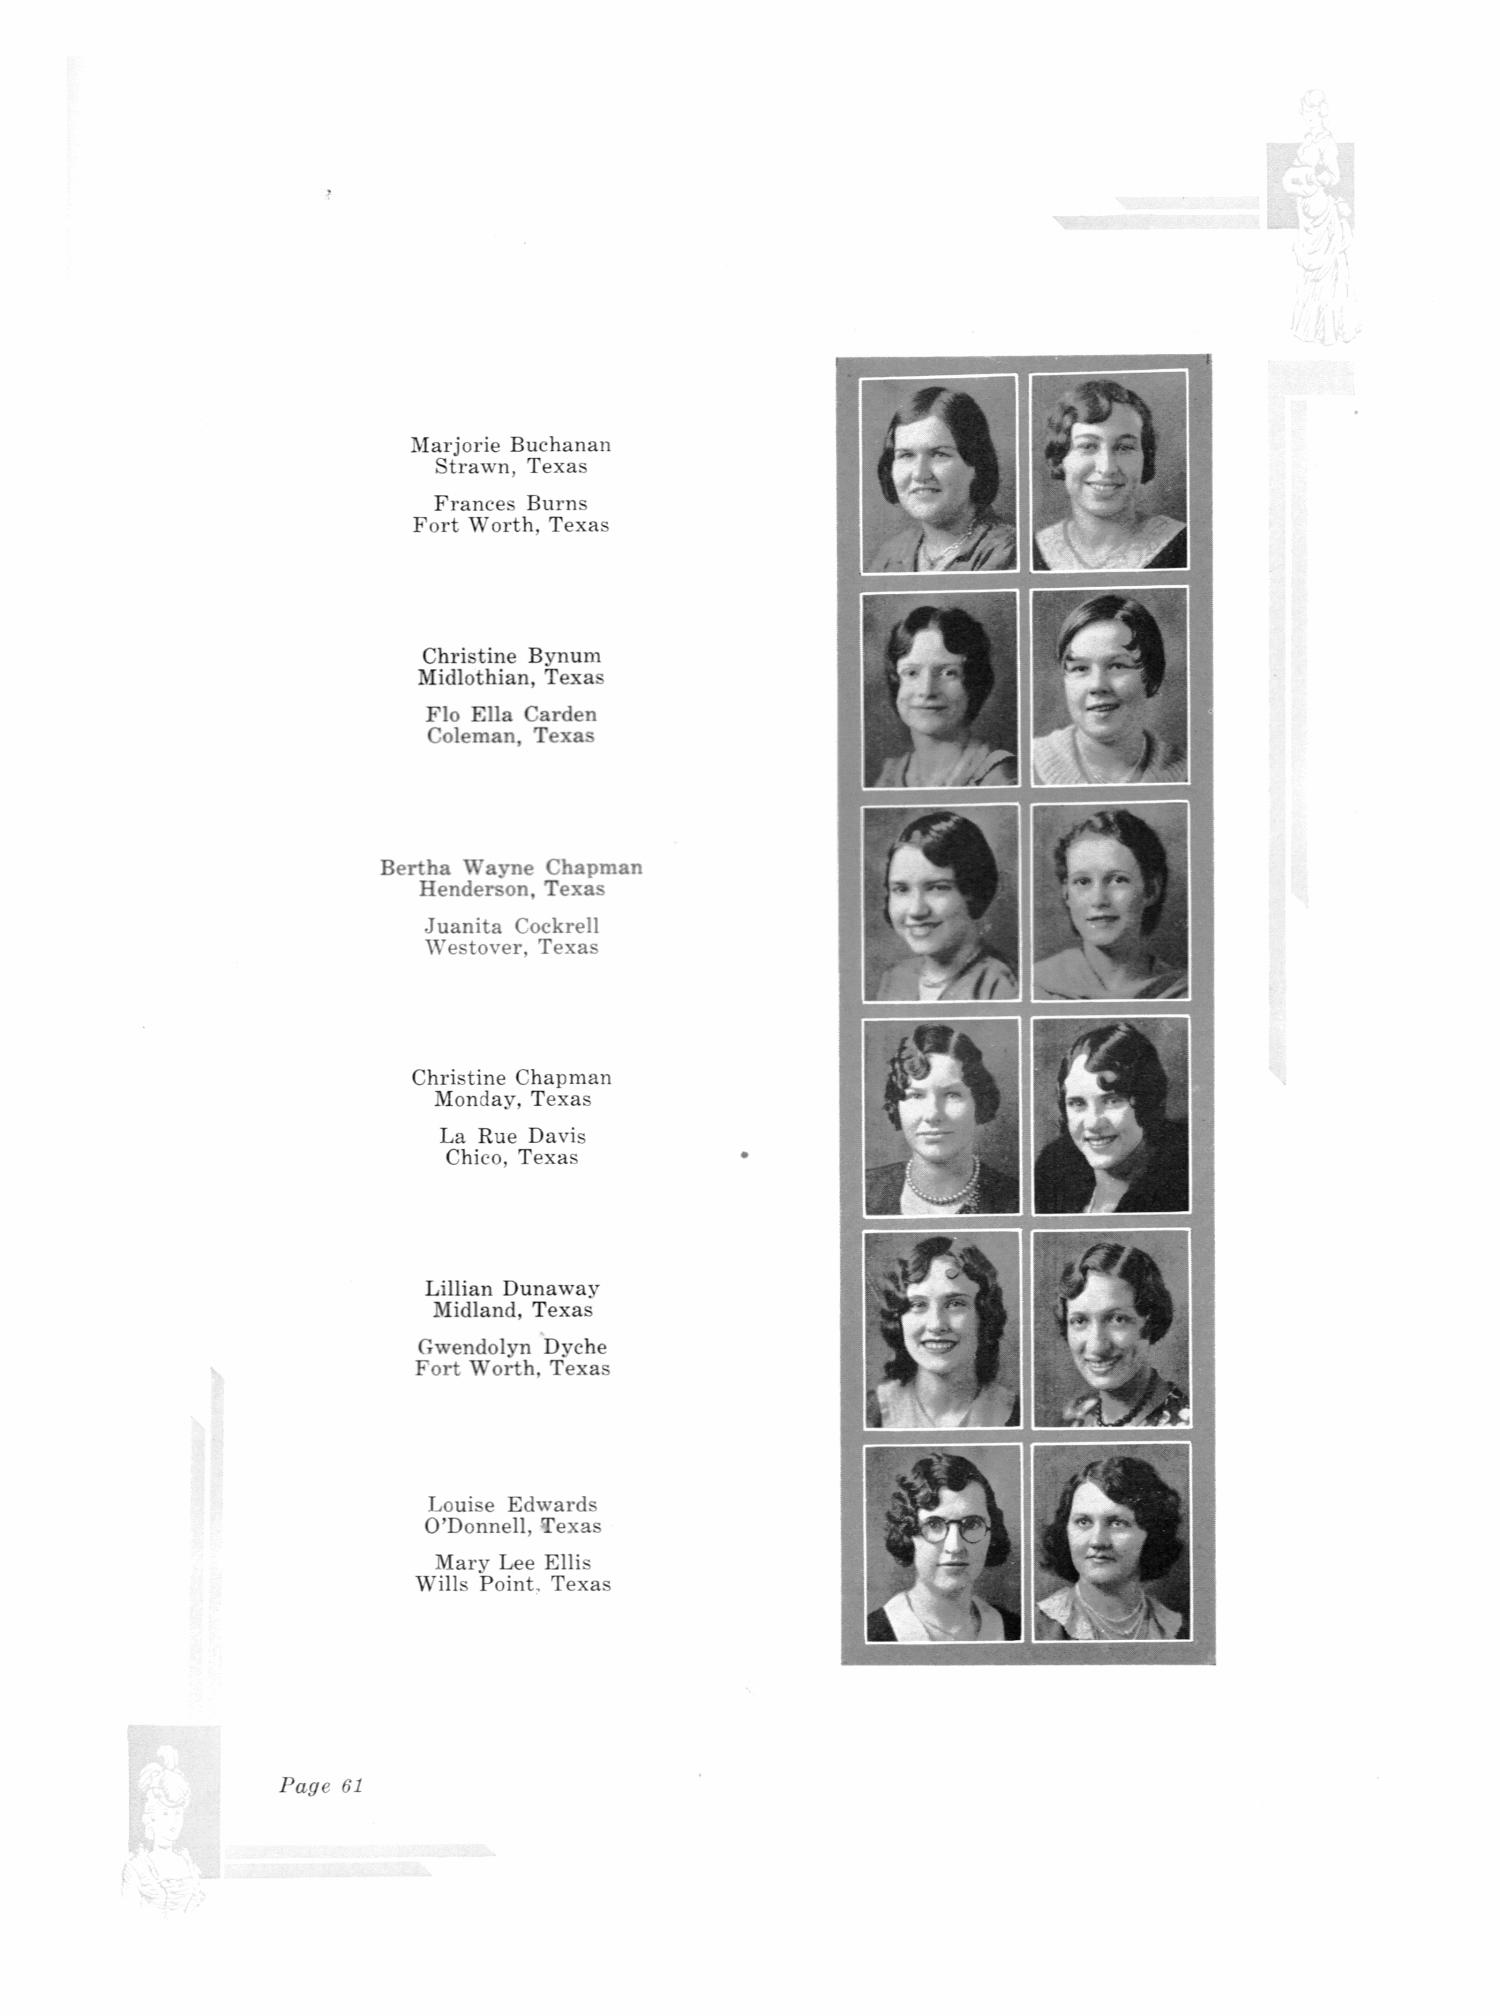 TXWOCO, Yearbook of Texas Woman's College, 1931
                                                
                                                    61
                                                